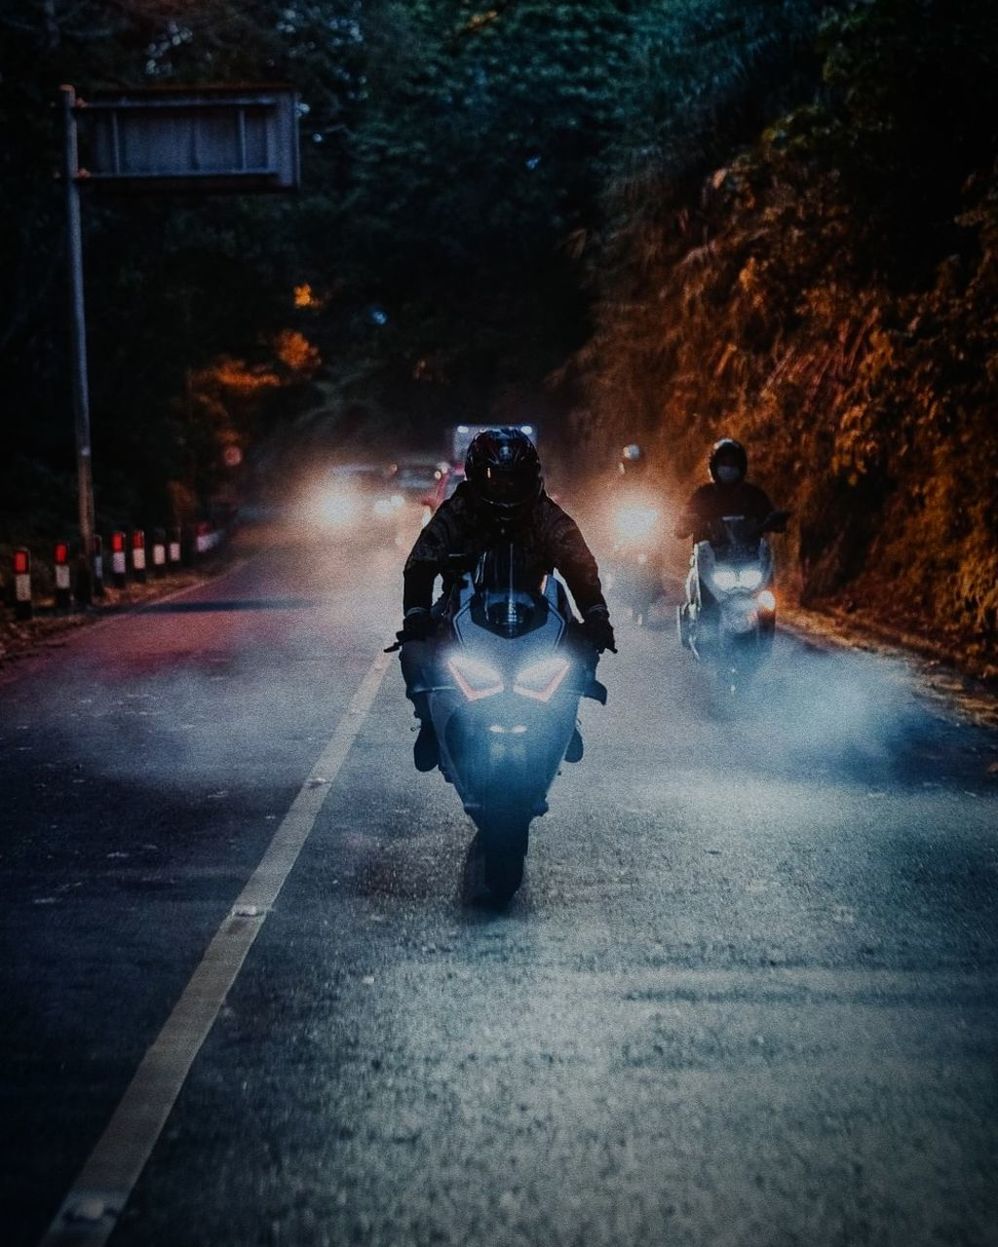 darkness, night, transportation, road, street, city, light, one person, full length, illuminated, adult, sign, motion, rear view, nature, mode of transportation, architecture, tree, men, screenshot, outdoors, walking, motor vehicle, protection, headlight, person, wet